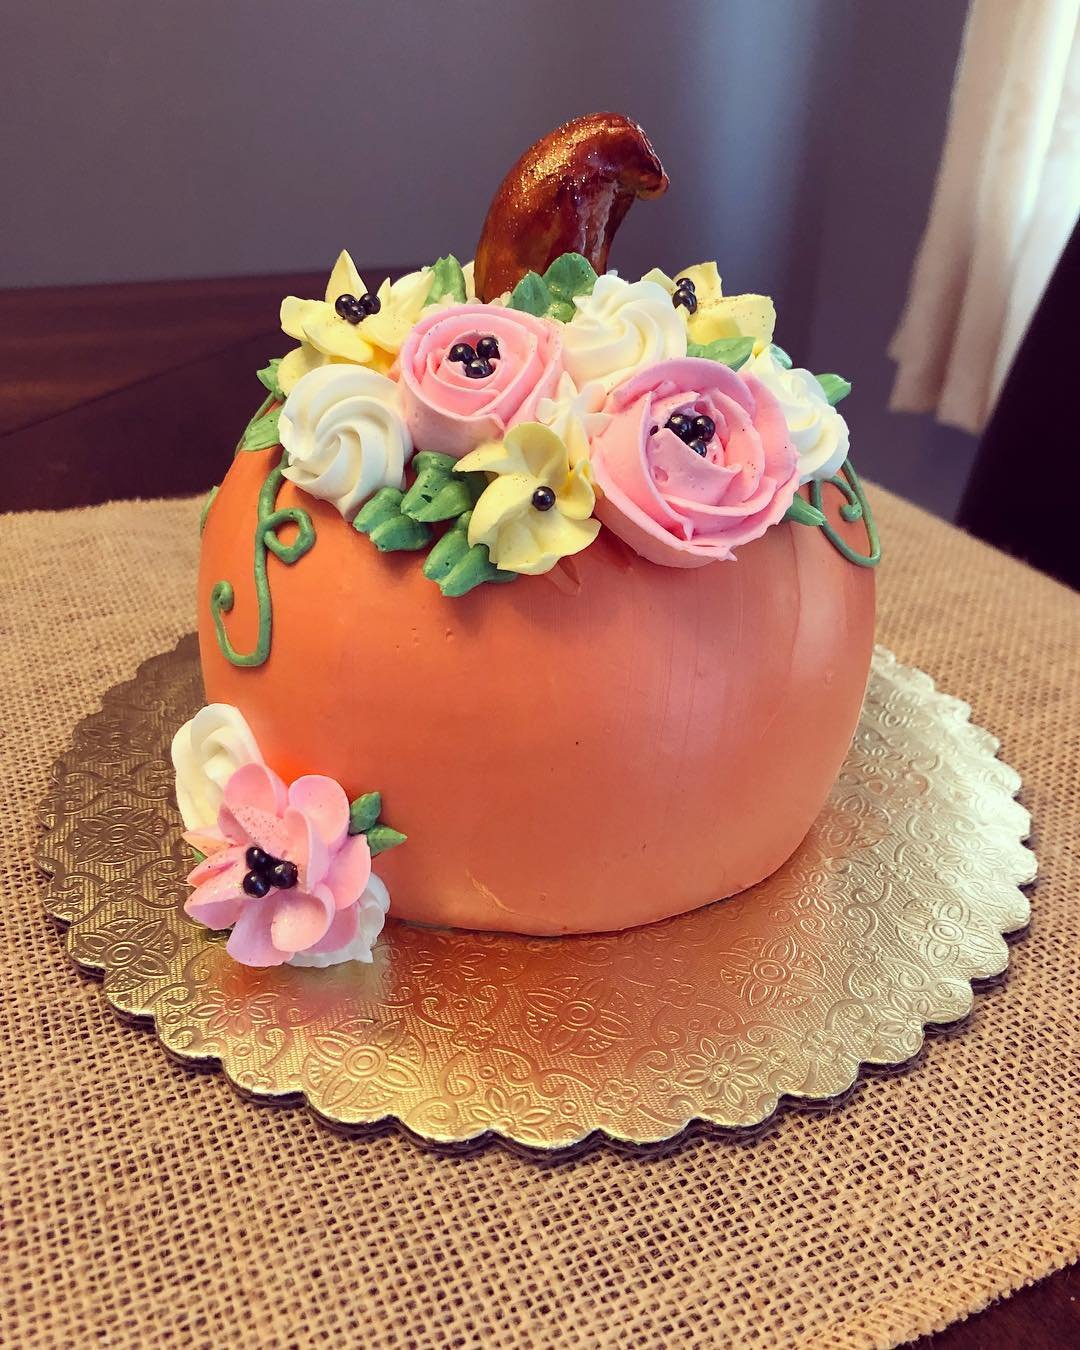 Cakes for the fall season and birthdays to see! More expert bakerymanship...from age 6 to 60 image pic